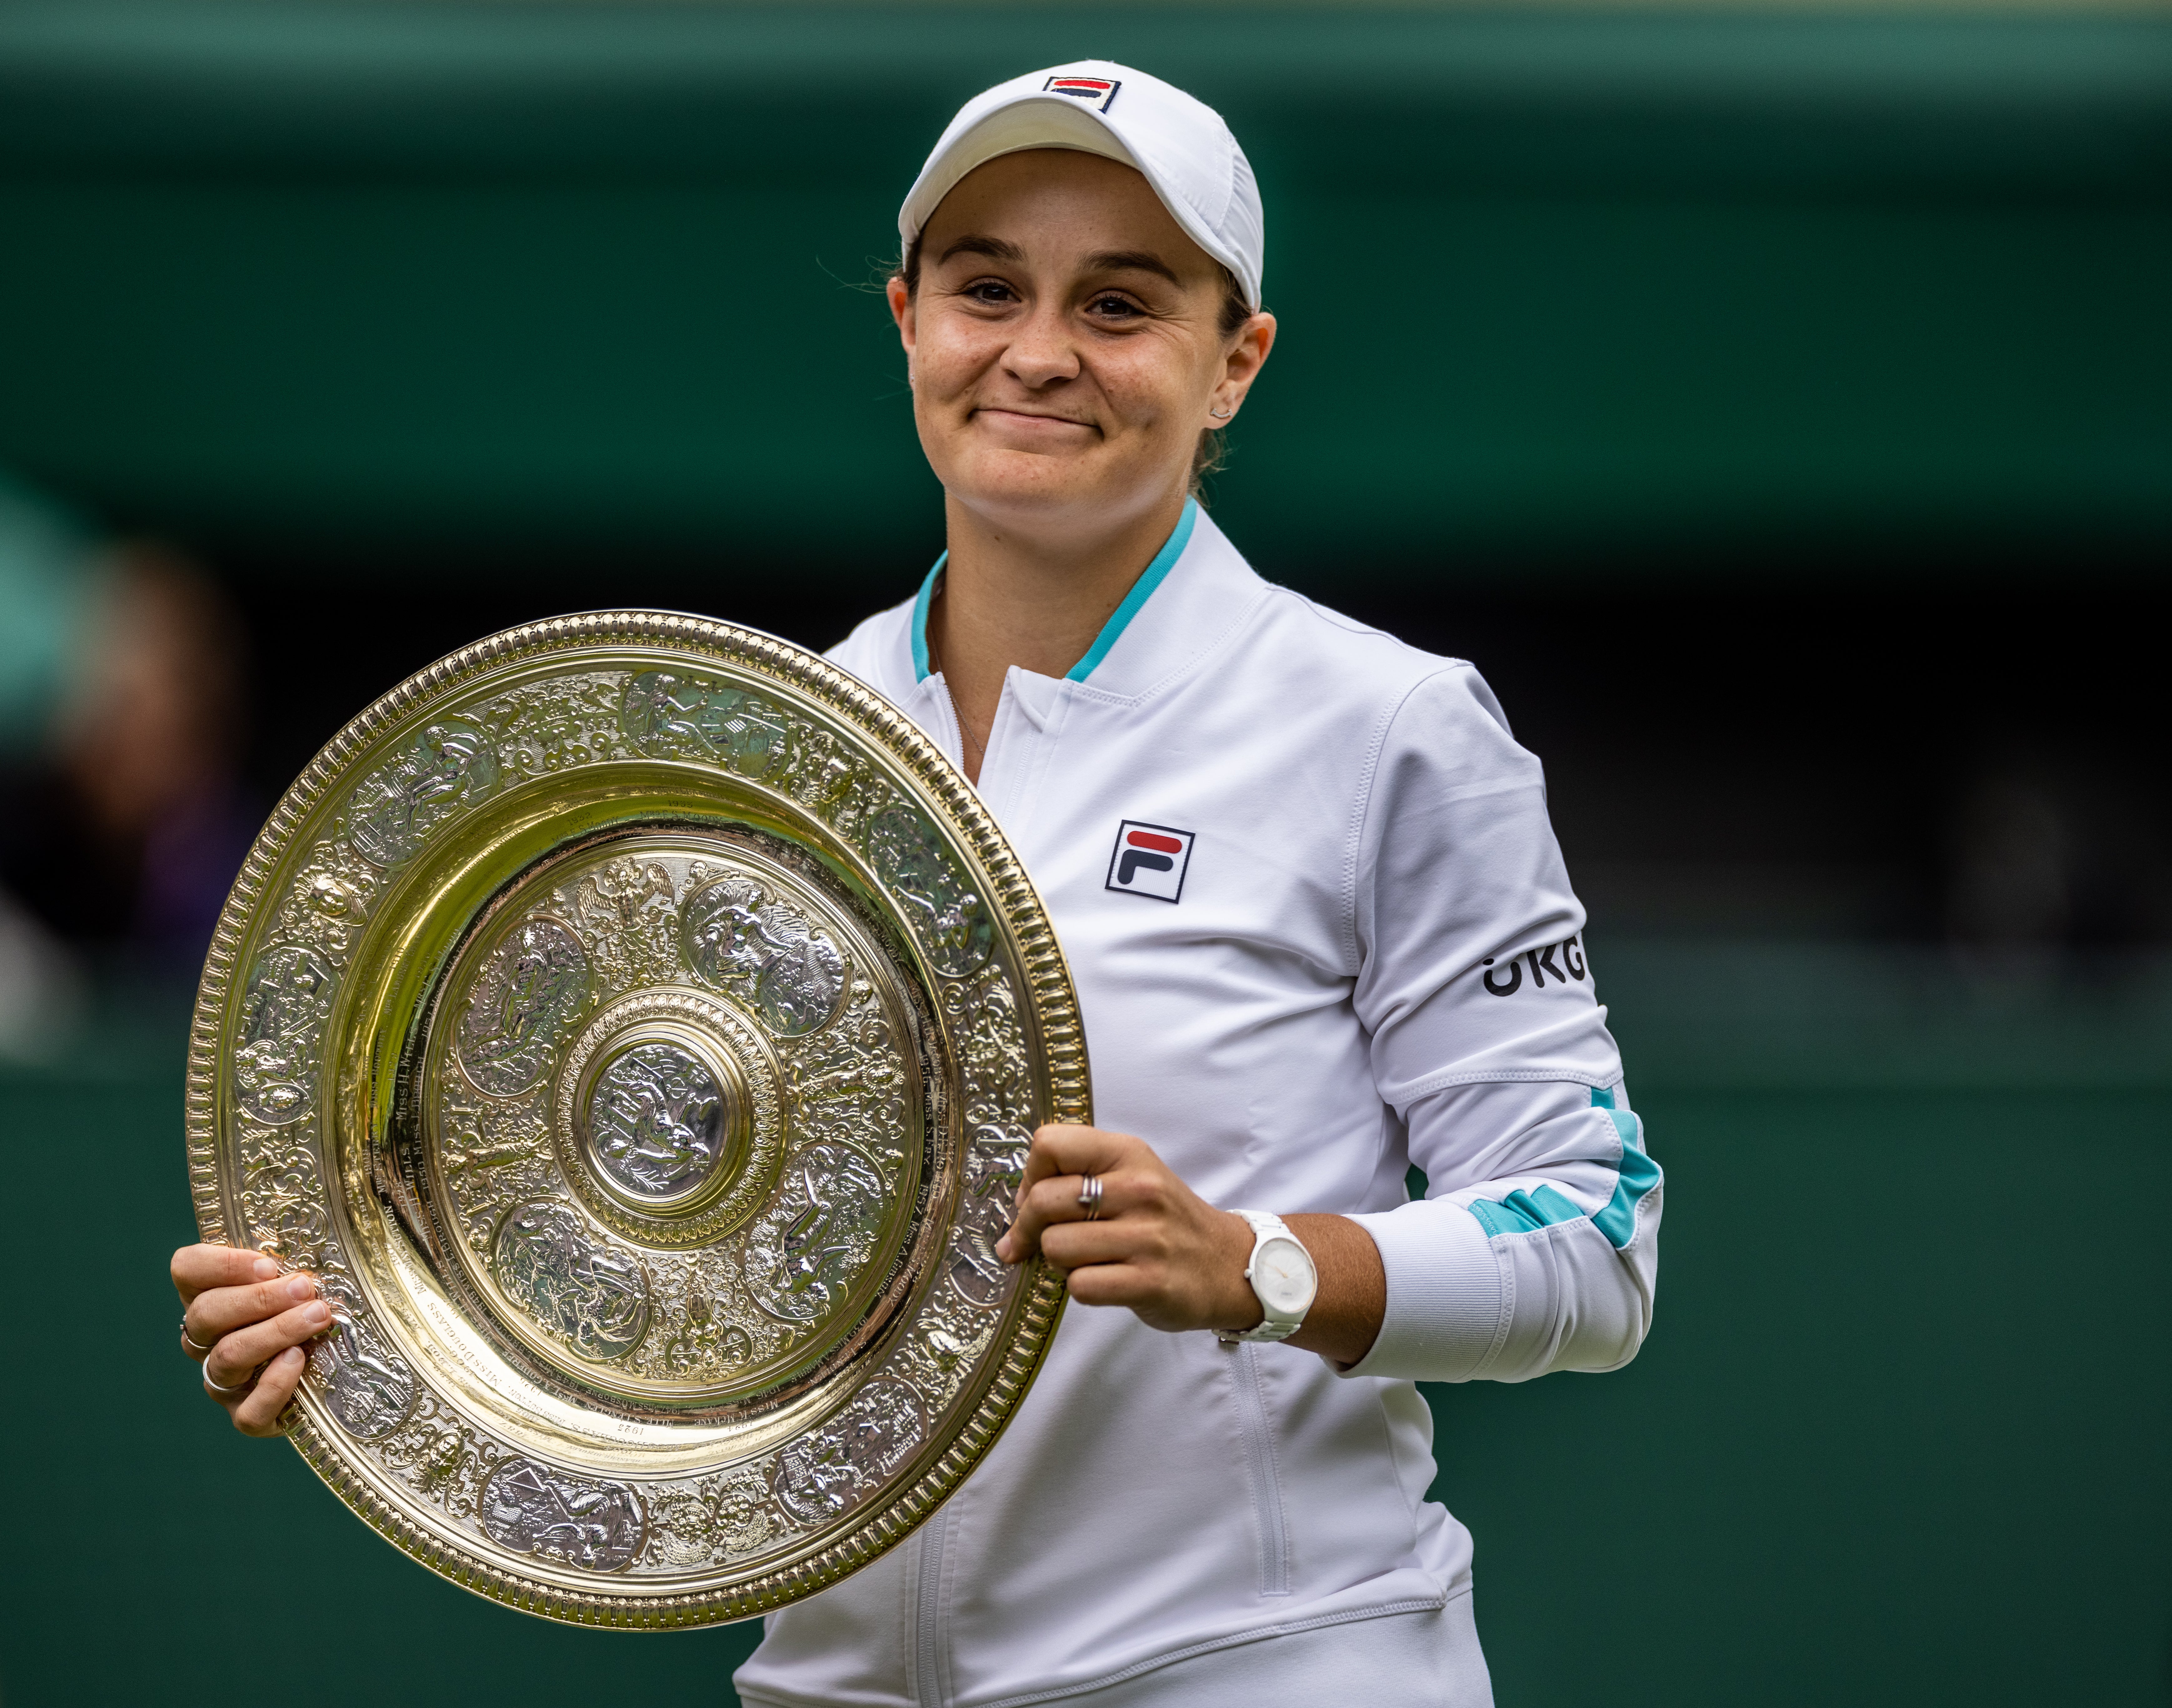 World number one Ashleigh Barty will not defend her season-ending WTA Finals title nor compete further in 2021 due to quarantine restrictions in her native Australia (Steven Paston/PA)